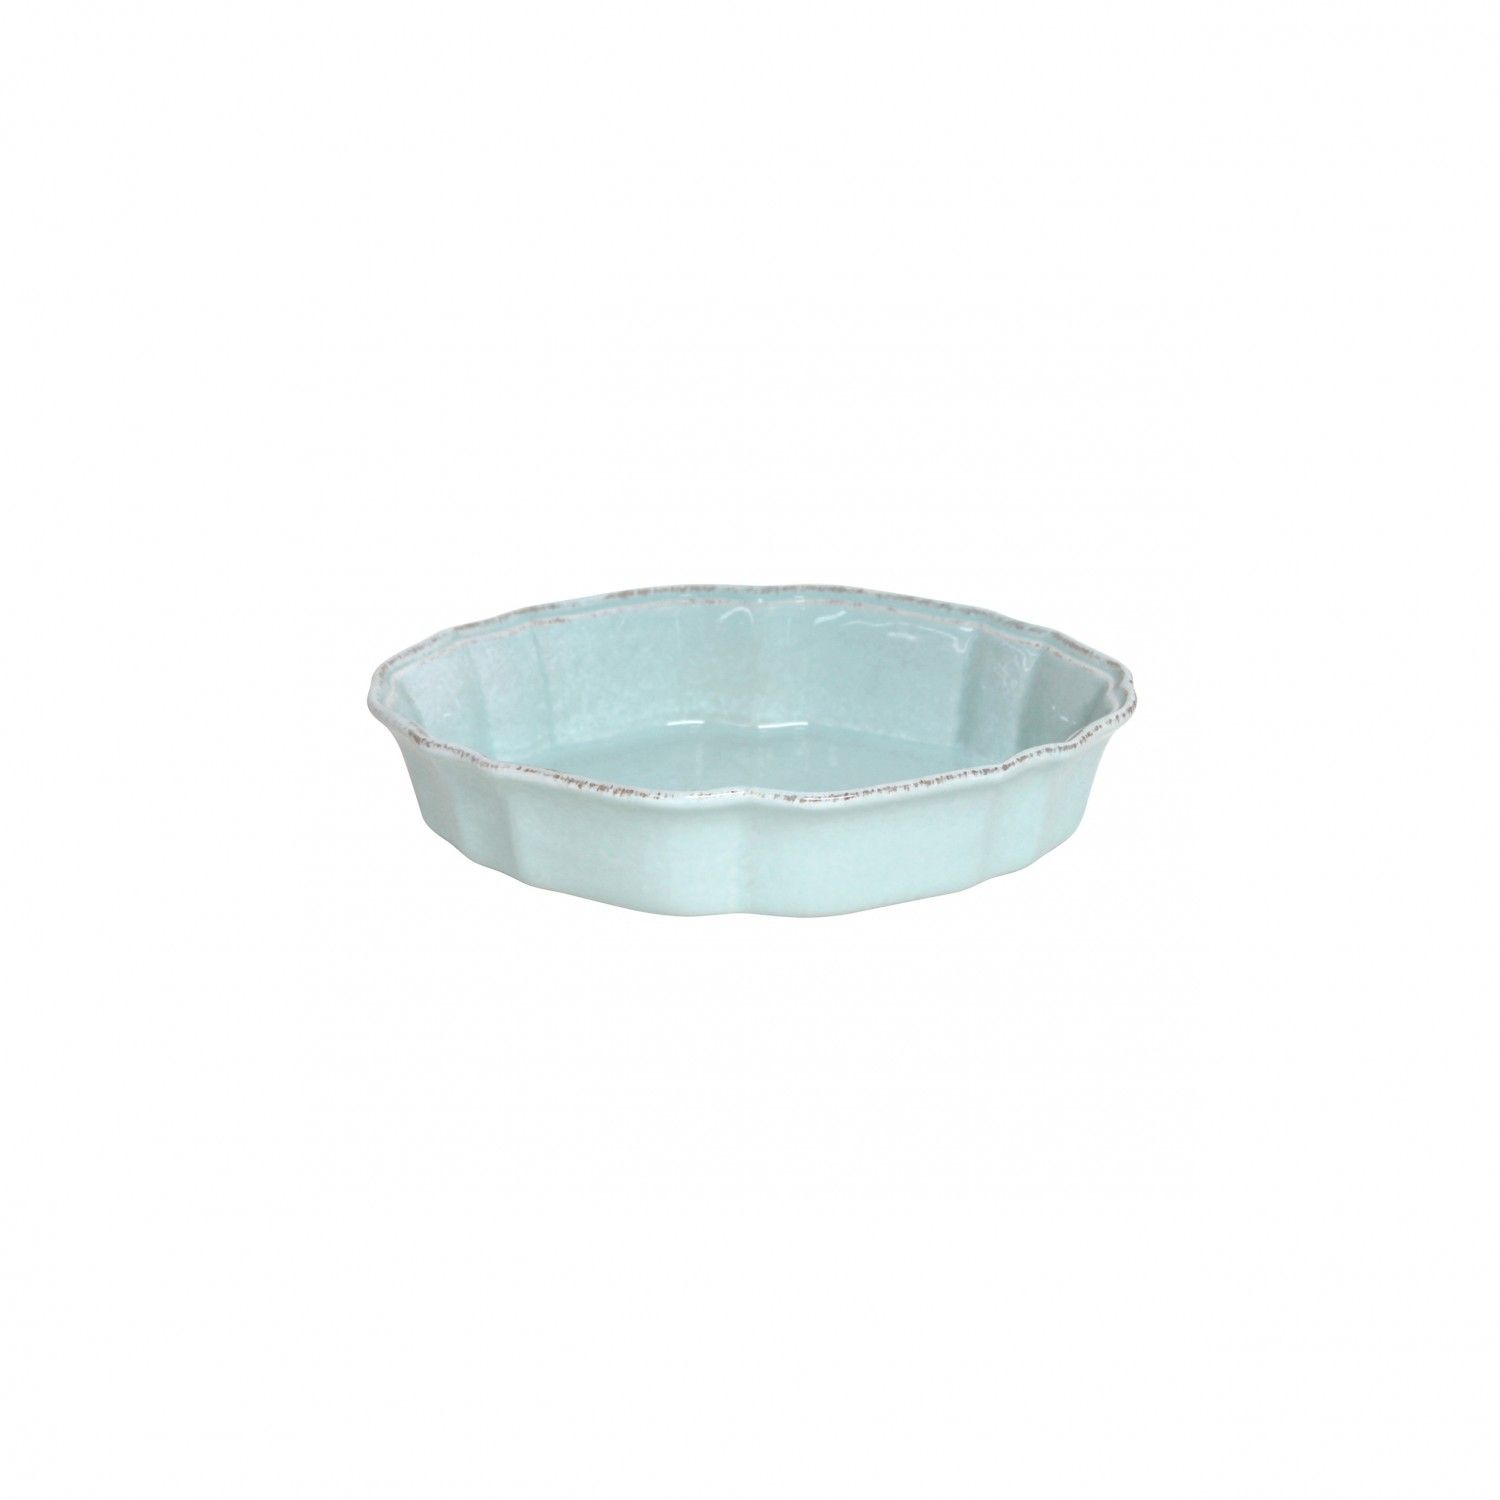 Impressions Turquoise Oval Baker Small 25.4cm Gift